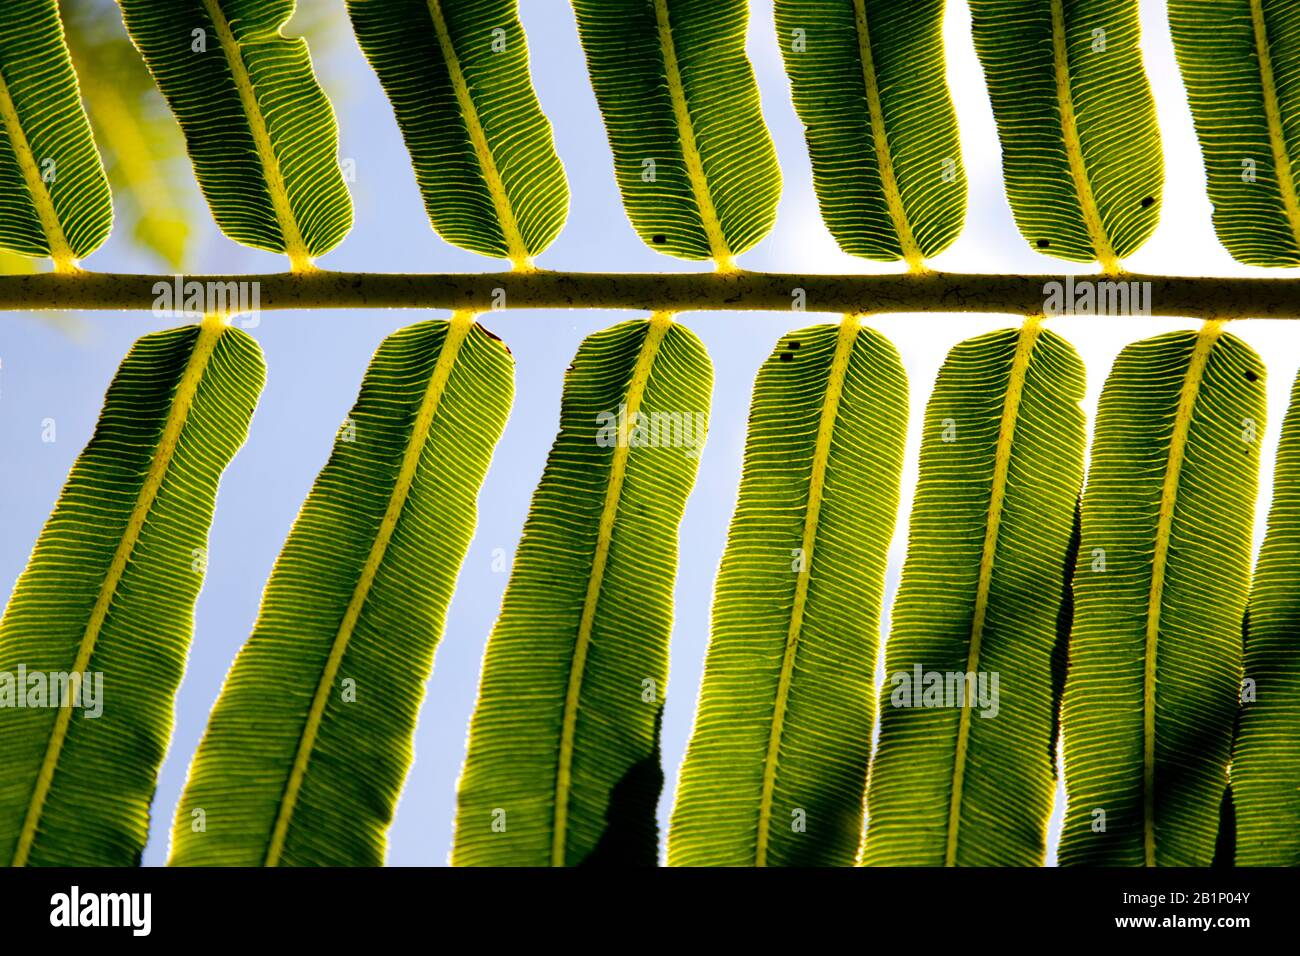 fern with spores on underside Stock Photo